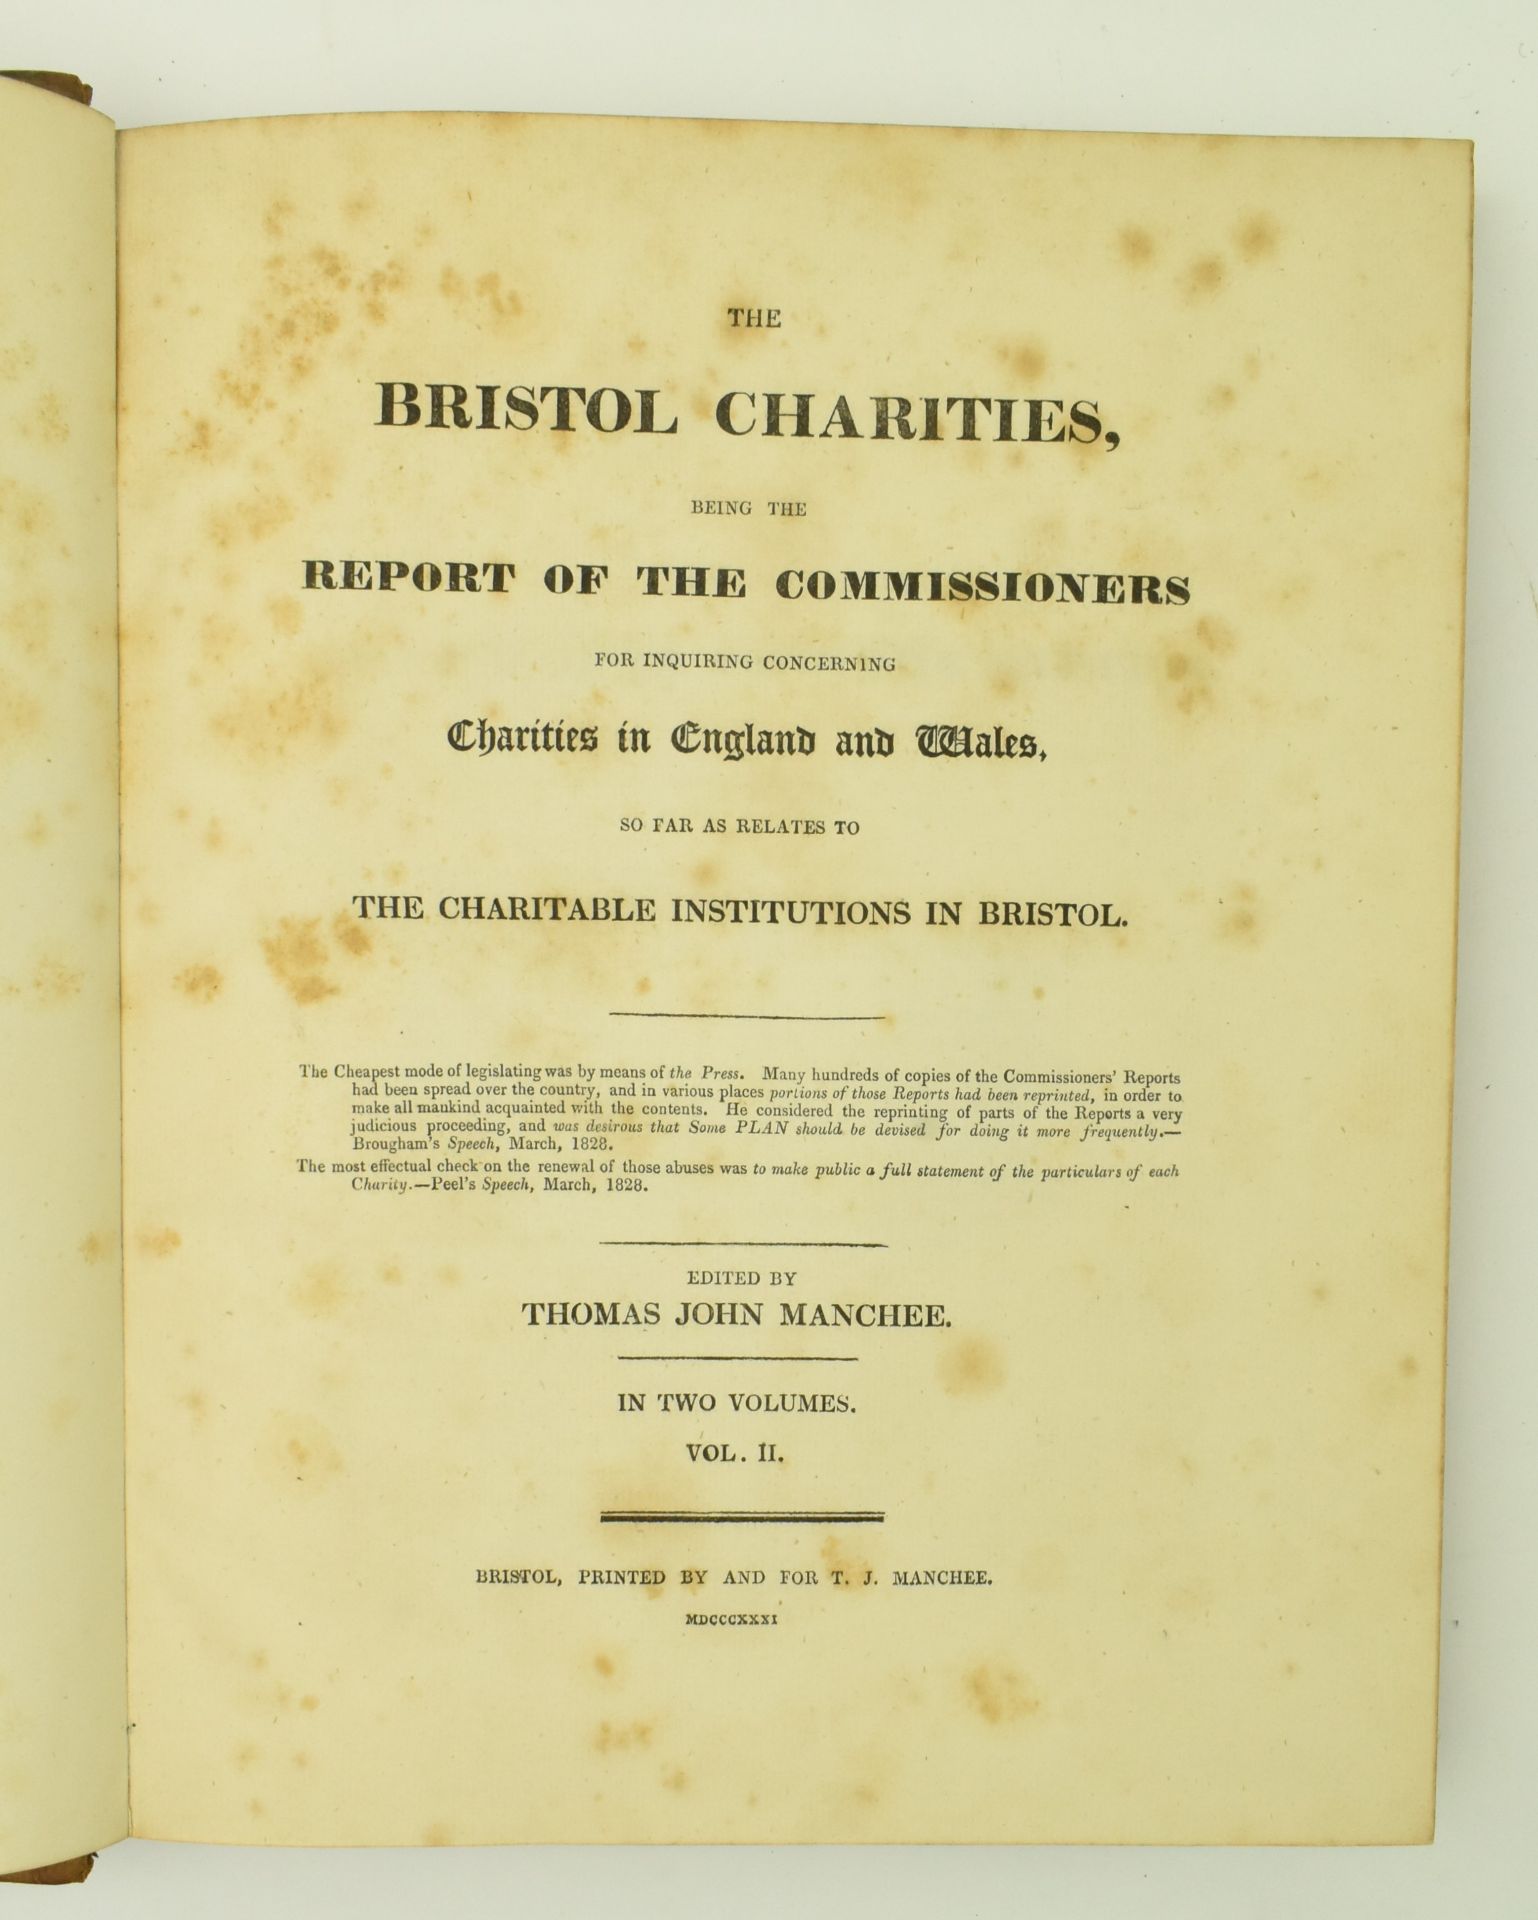 BRISTOL LOCAL INTEREST. 1831 THE BRISTOL CHARITIES IN TWO VOLS - Image 5 of 8